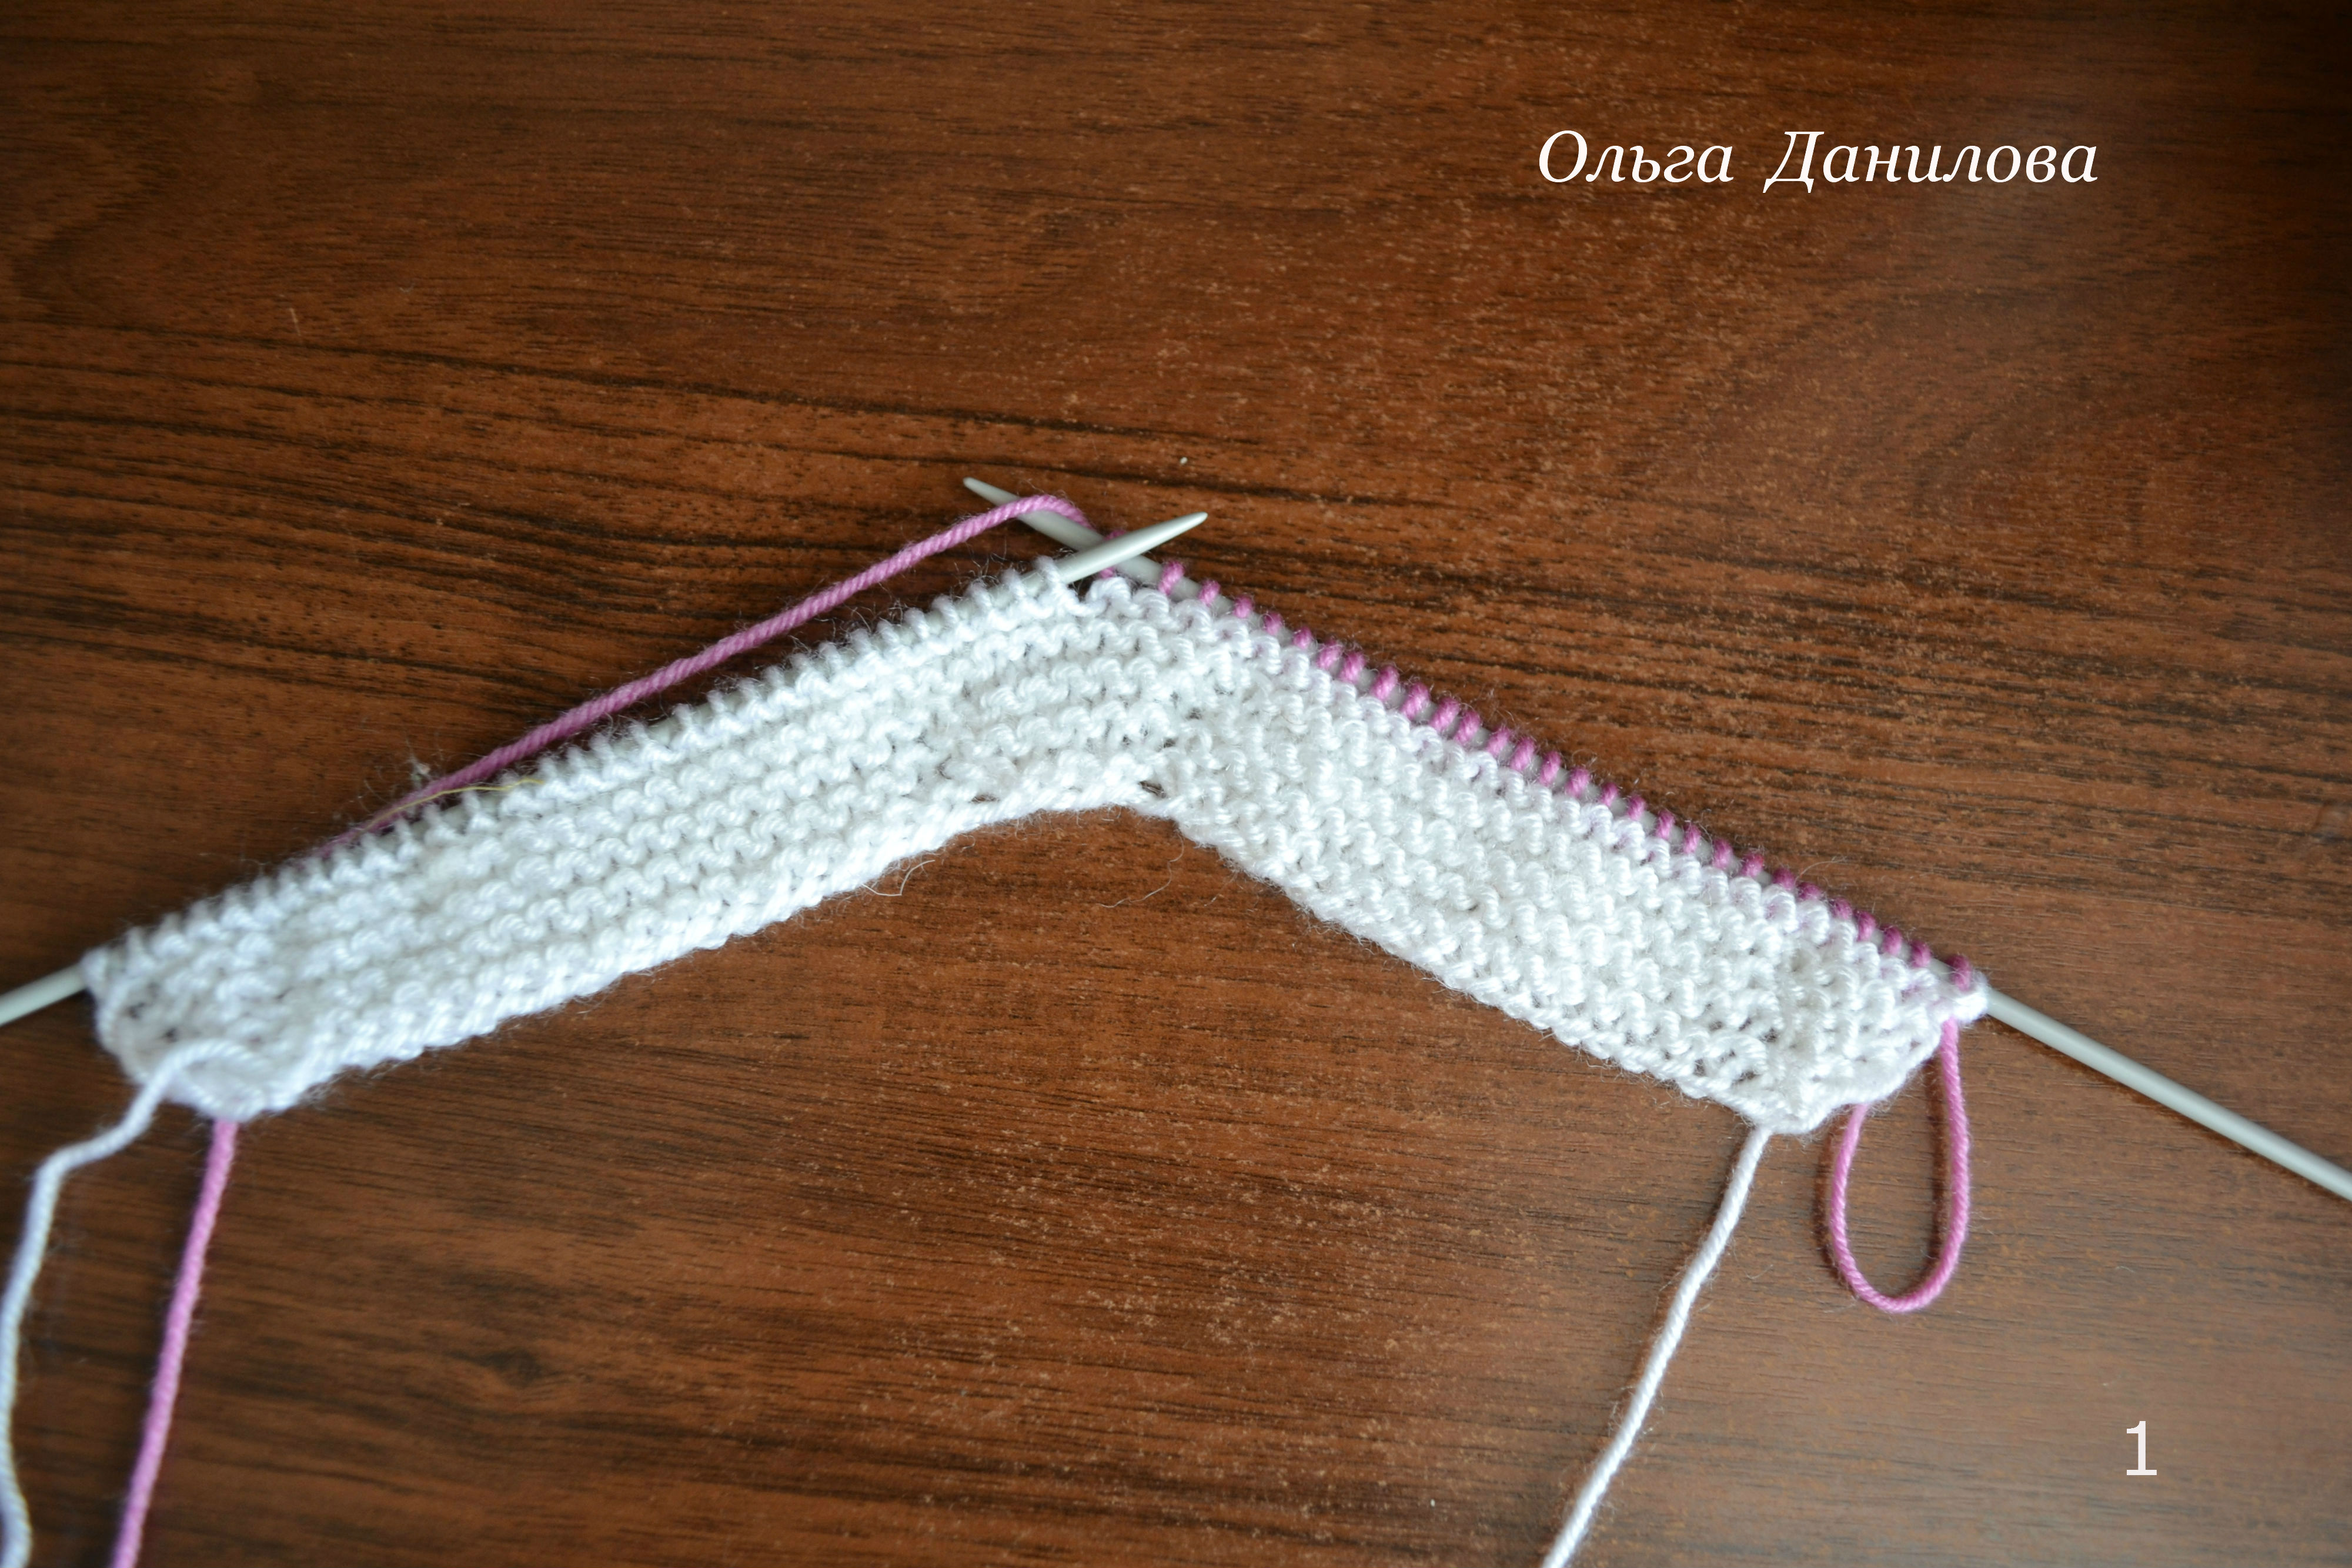 How-to-Make-Pretty-Knitted-Baby-Booties-1.jpg